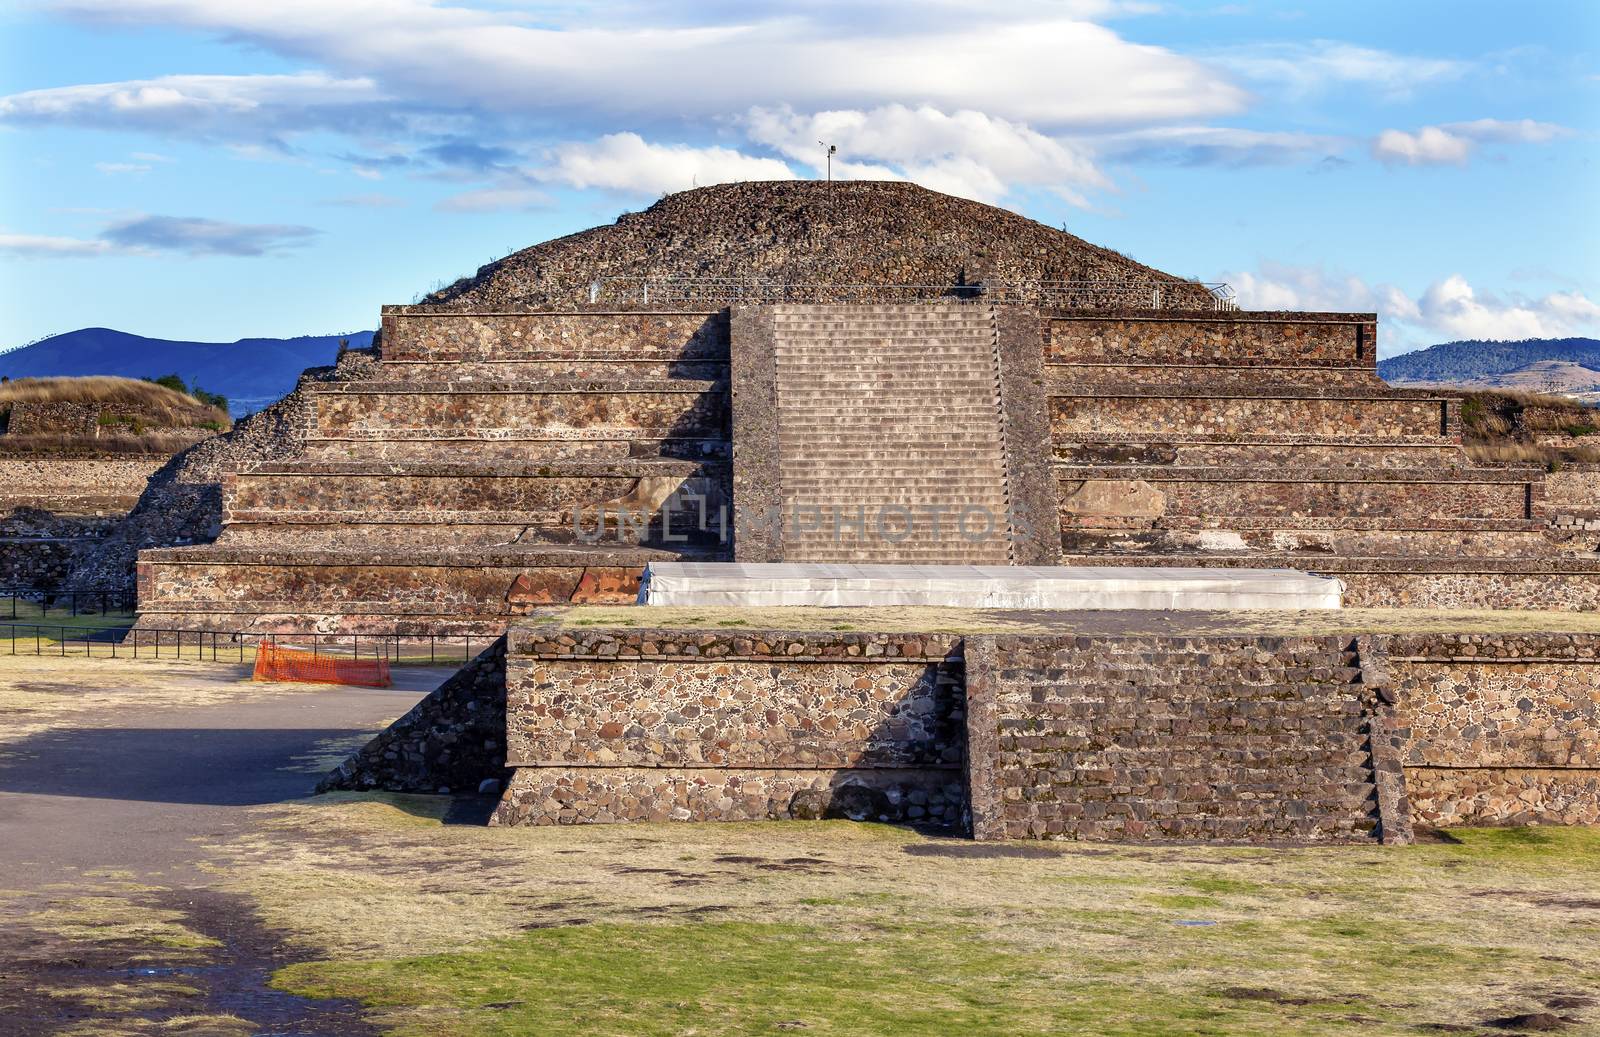 Temple of Quetzalcoatl Pyramid Teotihuacan Mexico City Mexico by bill_perry